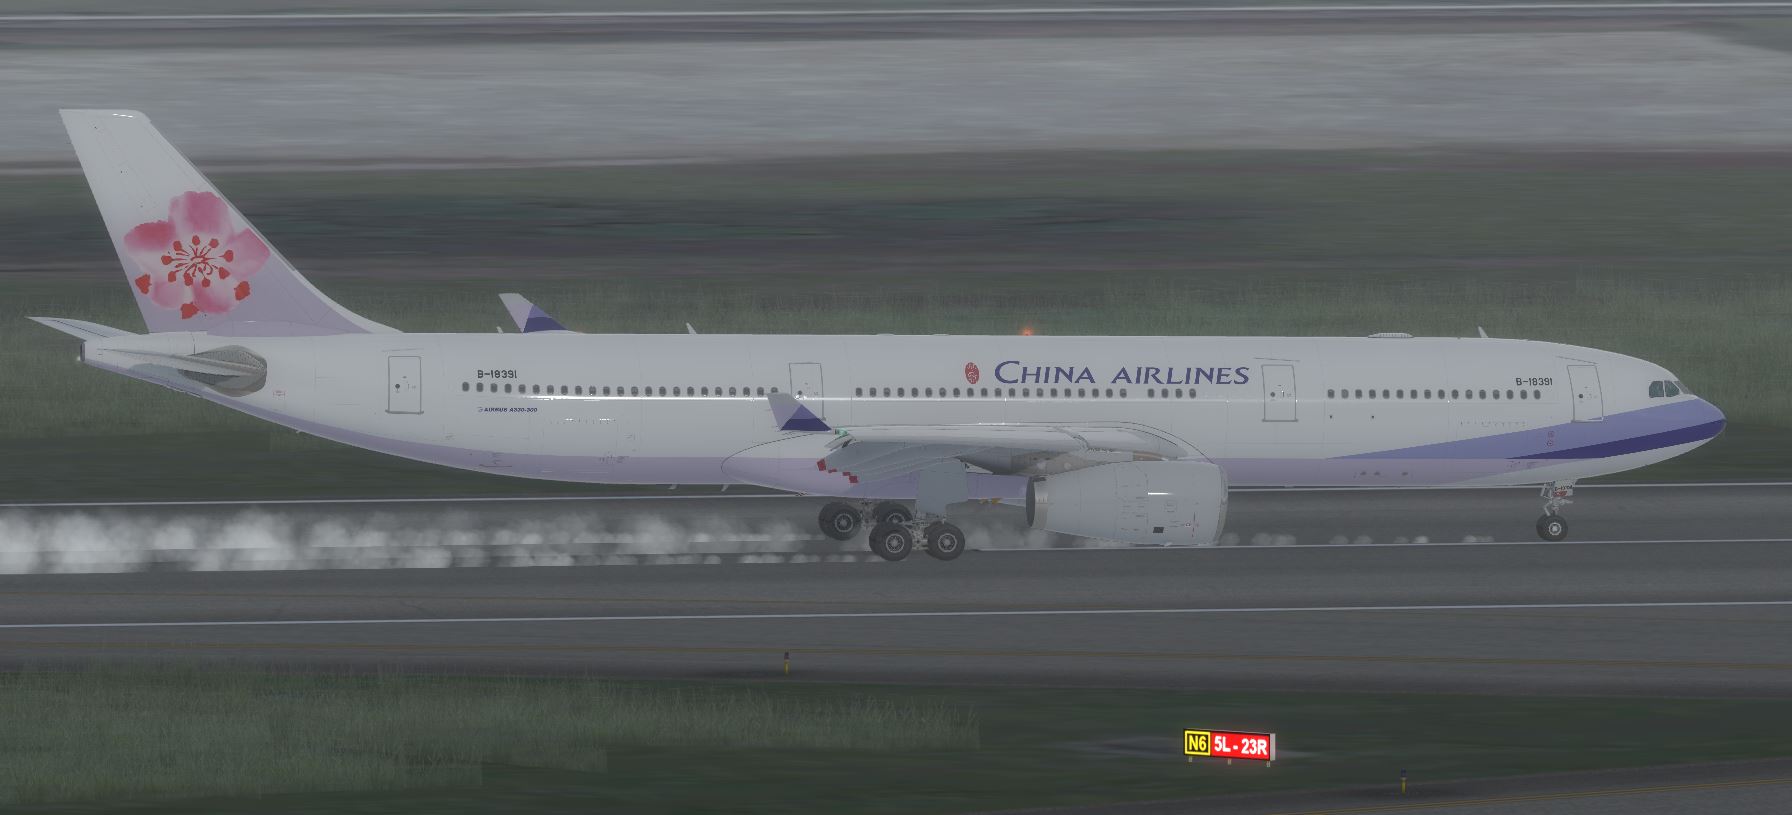 AS A330 ChinaAirline-9551 